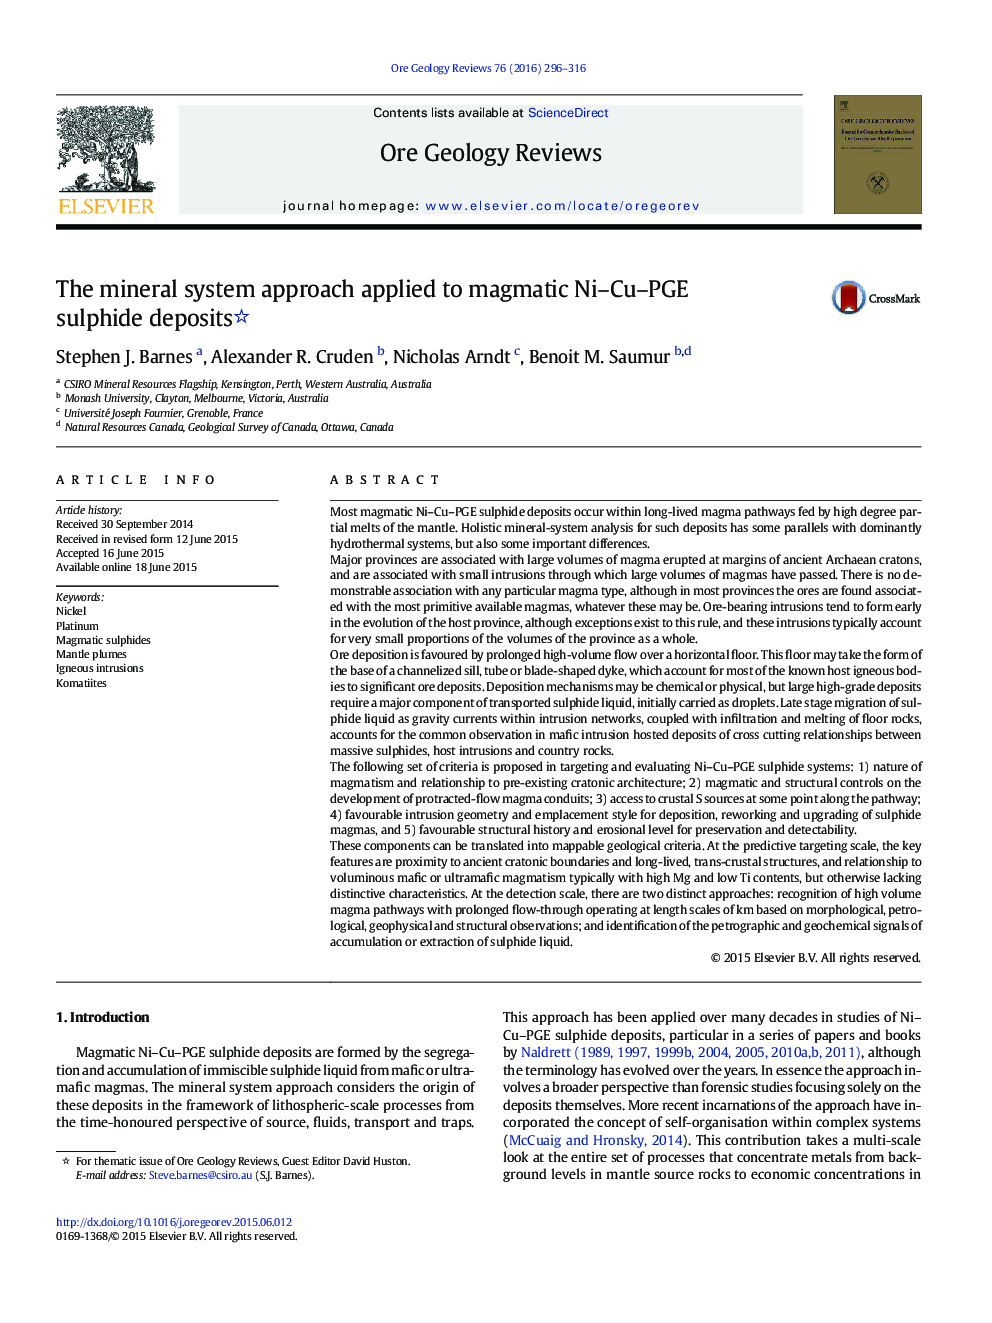 The mineral system approach applied to magmatic Ni–Cu–PGE sulphide deposits 